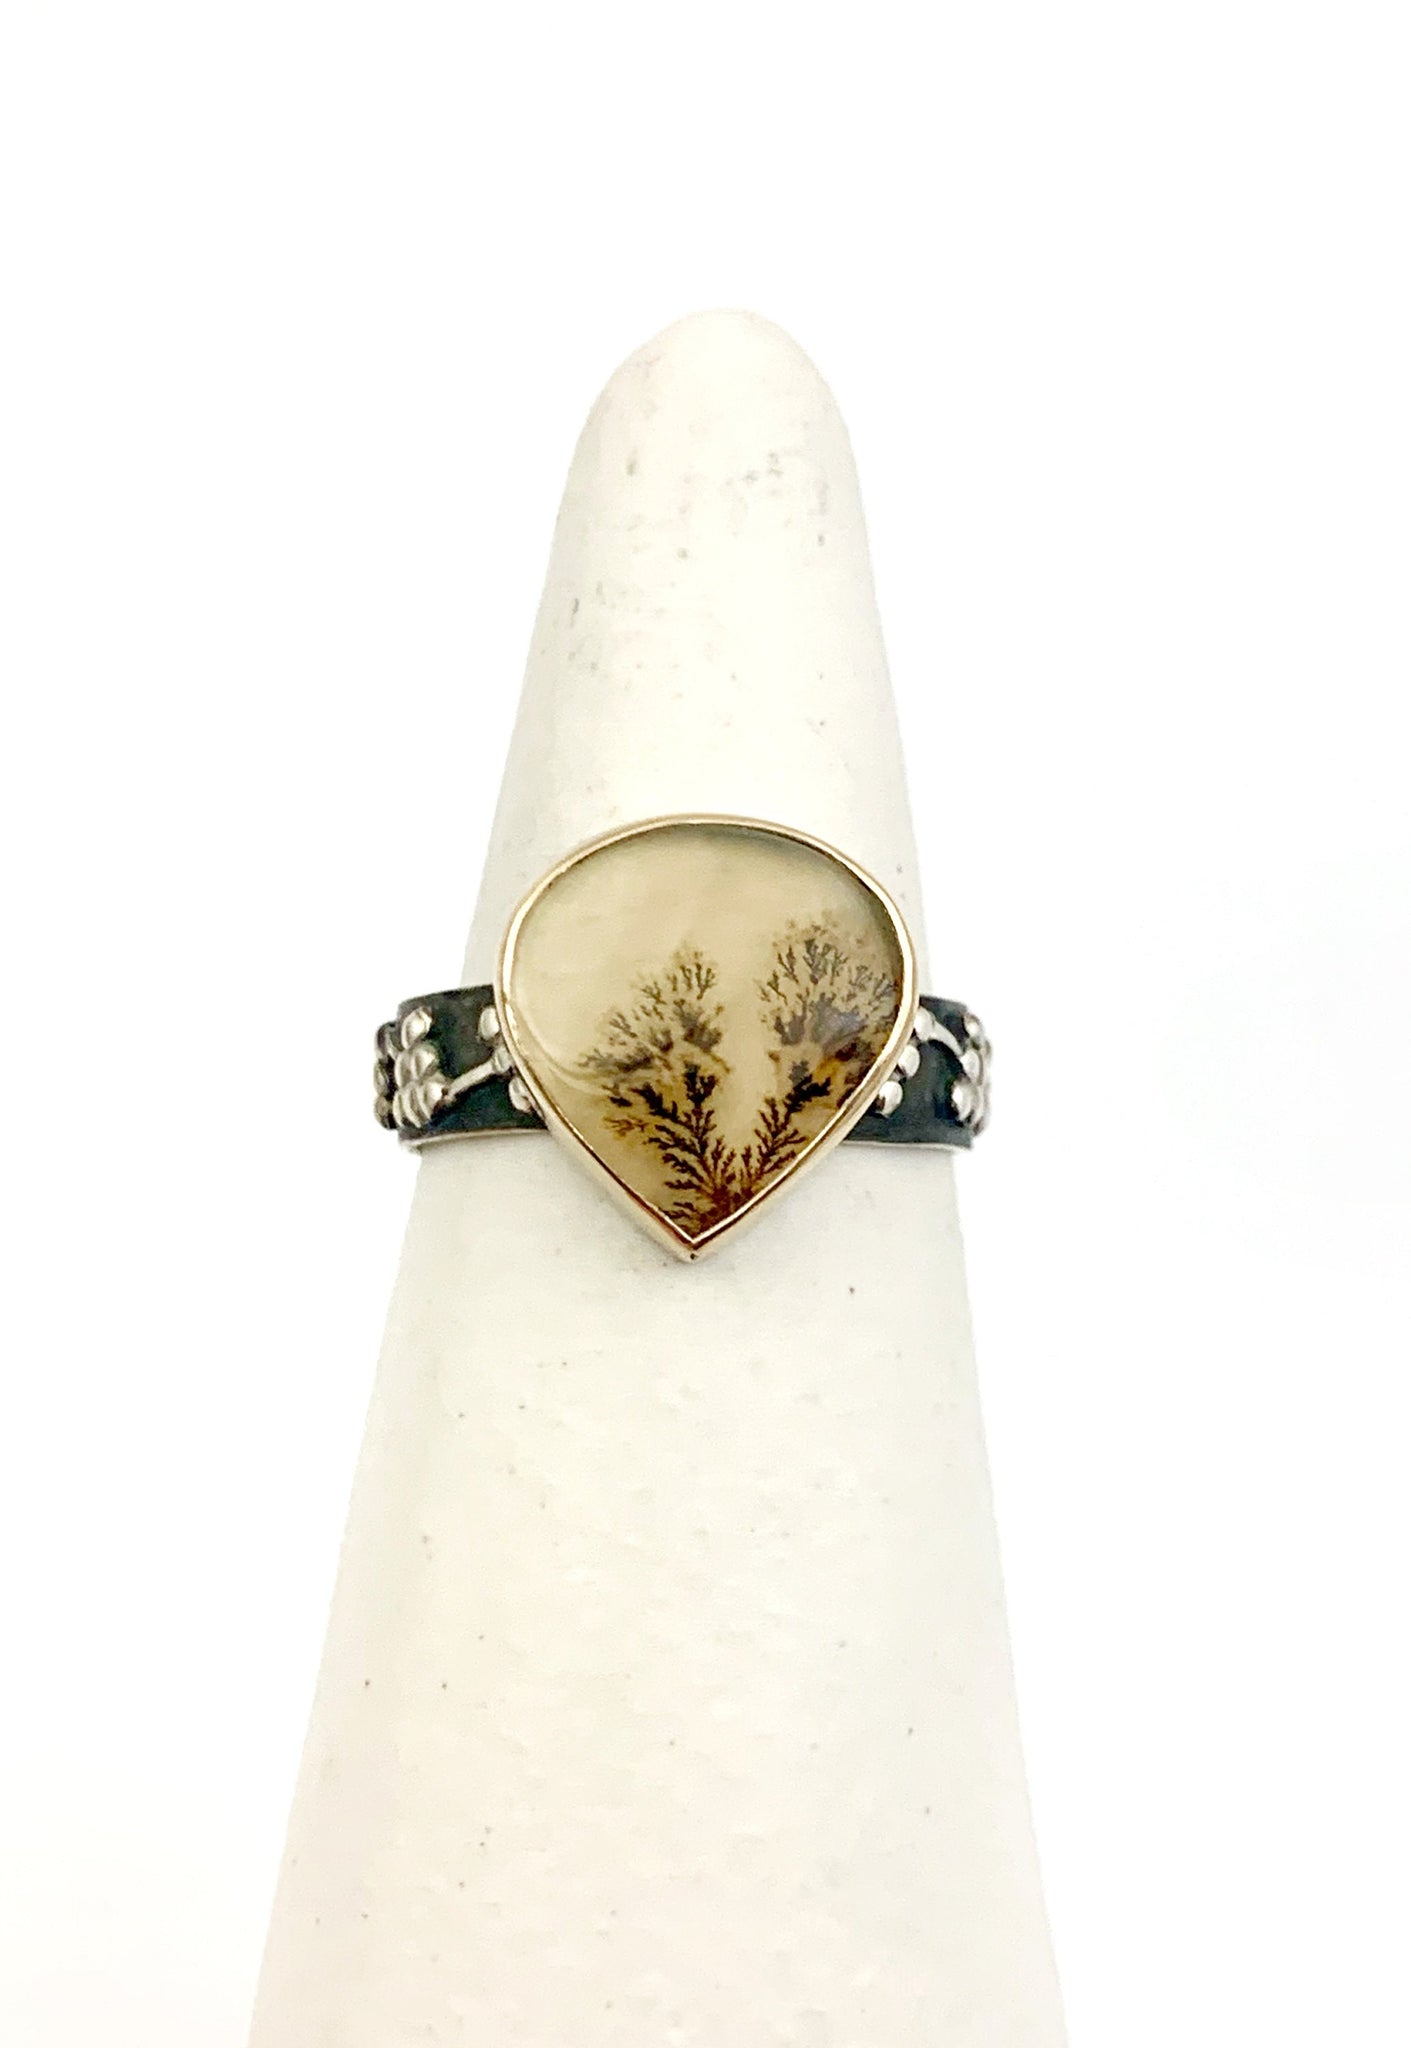 Dendritic Agate Teardrop Ring in Gold and Silver